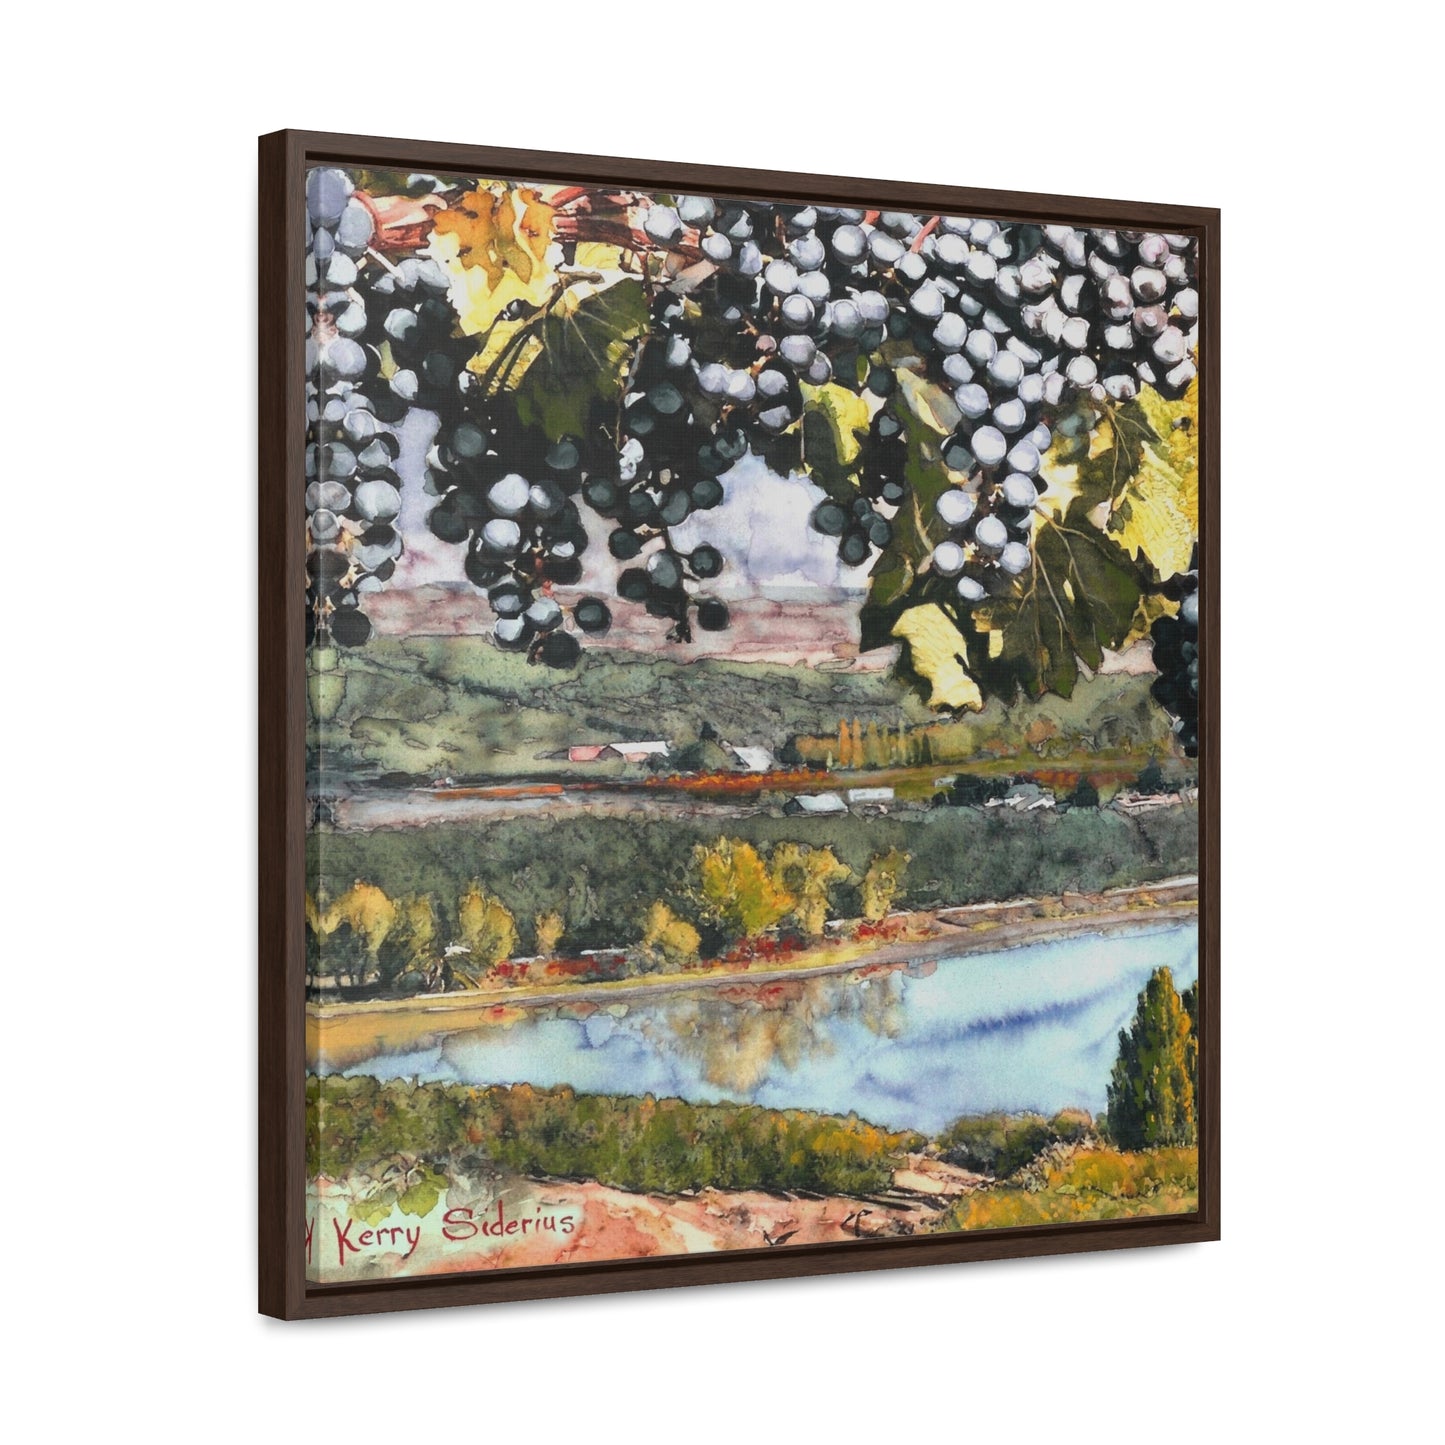 "Grapes Over The Columbia View" Gallery Canvas Wraps, Square Frame - Kerry Siderius Art 